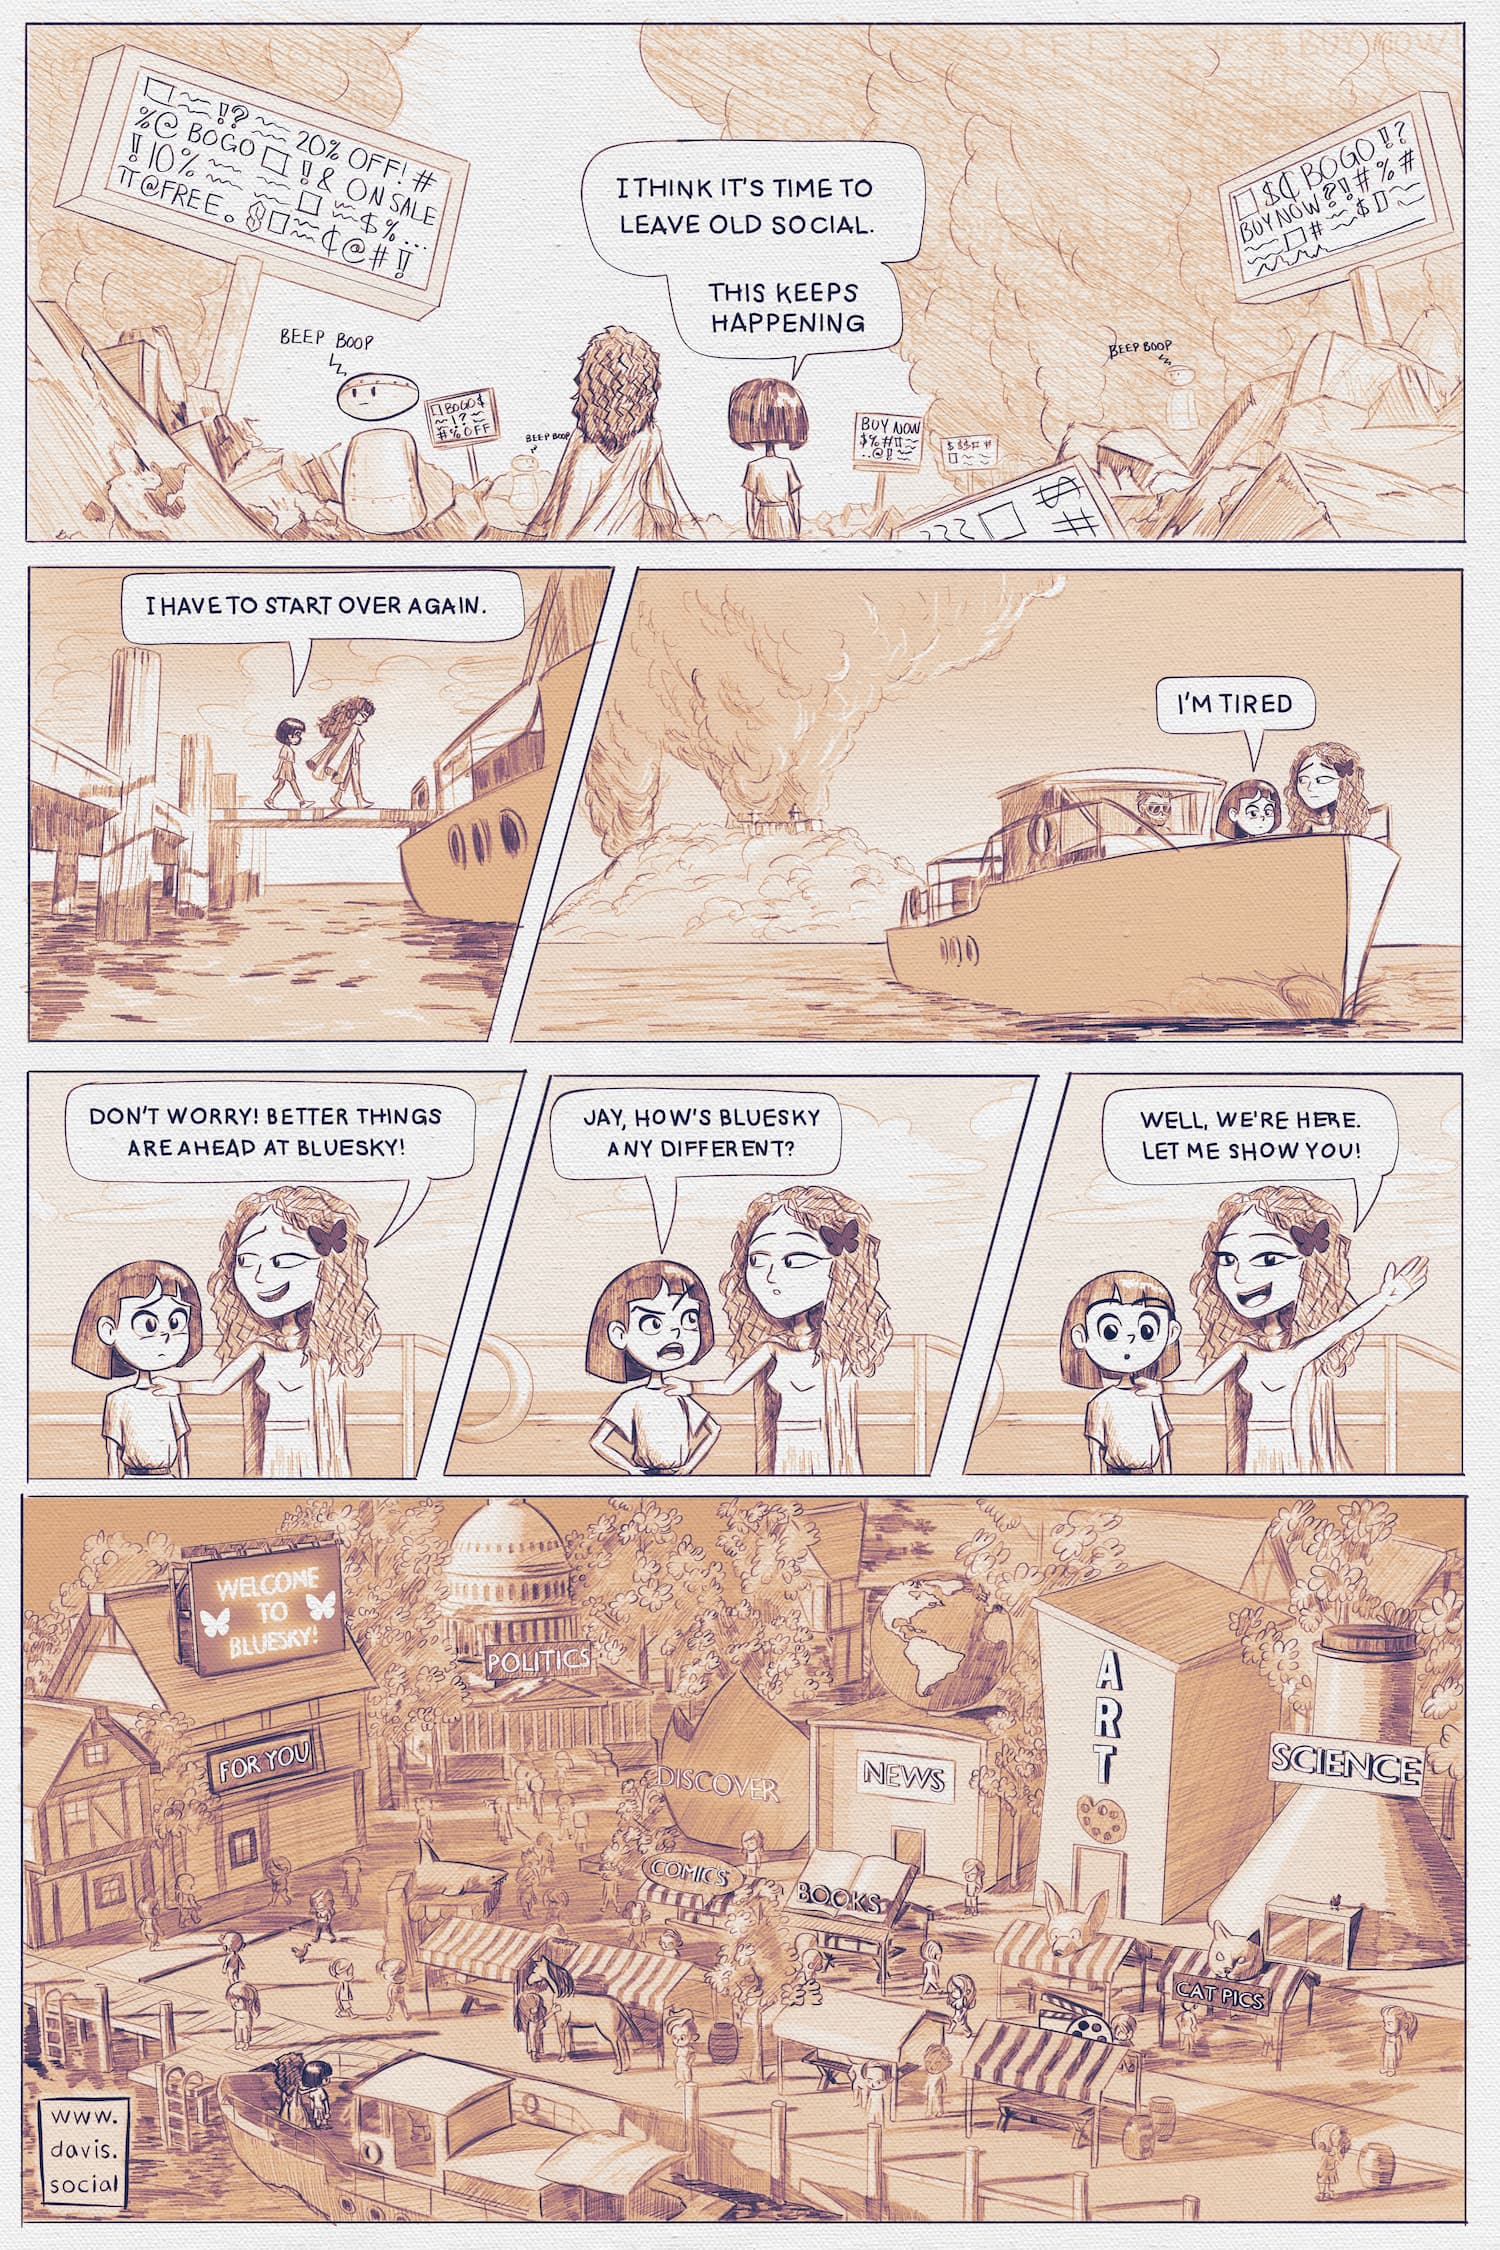 A multi-panel comic. Two characters stand amidst a pile of rubble. One says, 'I think it's time to leave old social. This keeps happening. I have to start over again. I'm tired.' The two characters board a boat. Jay says, 'Don't worry! Better things are ahead at Bluesky!' They arrive to a beautiful, festive area that has buildings labeled News, Discover, Art, Science, and more.